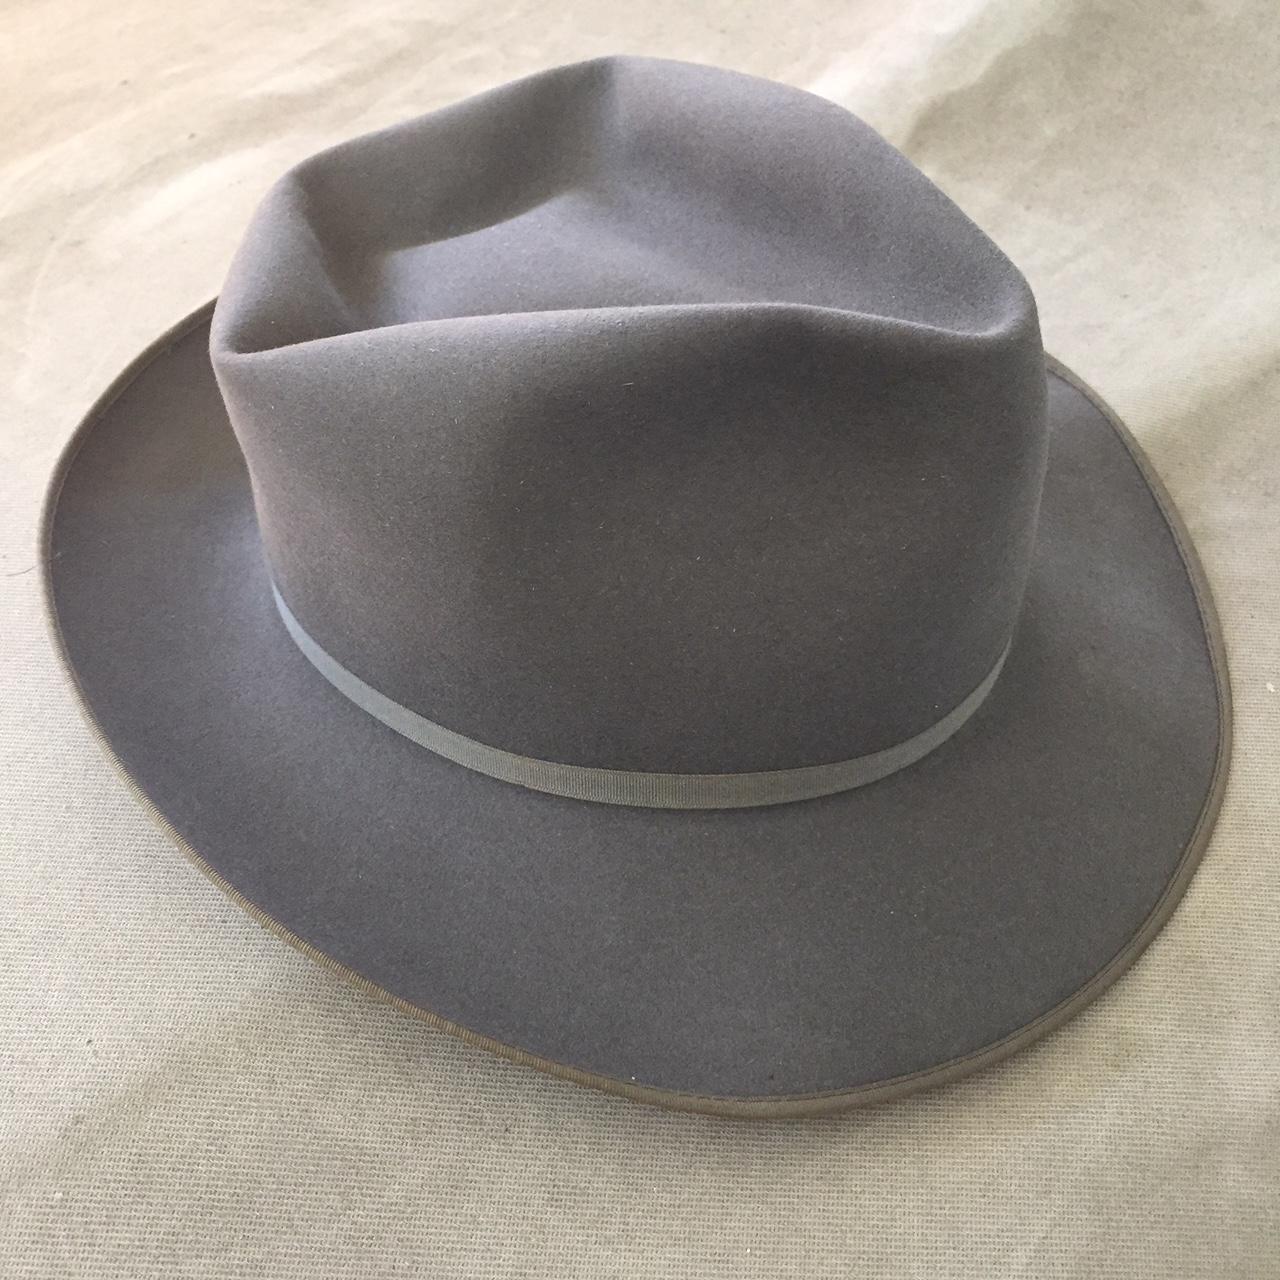 Post New Hats Here! | Page 1830 | The Fedora Lounge